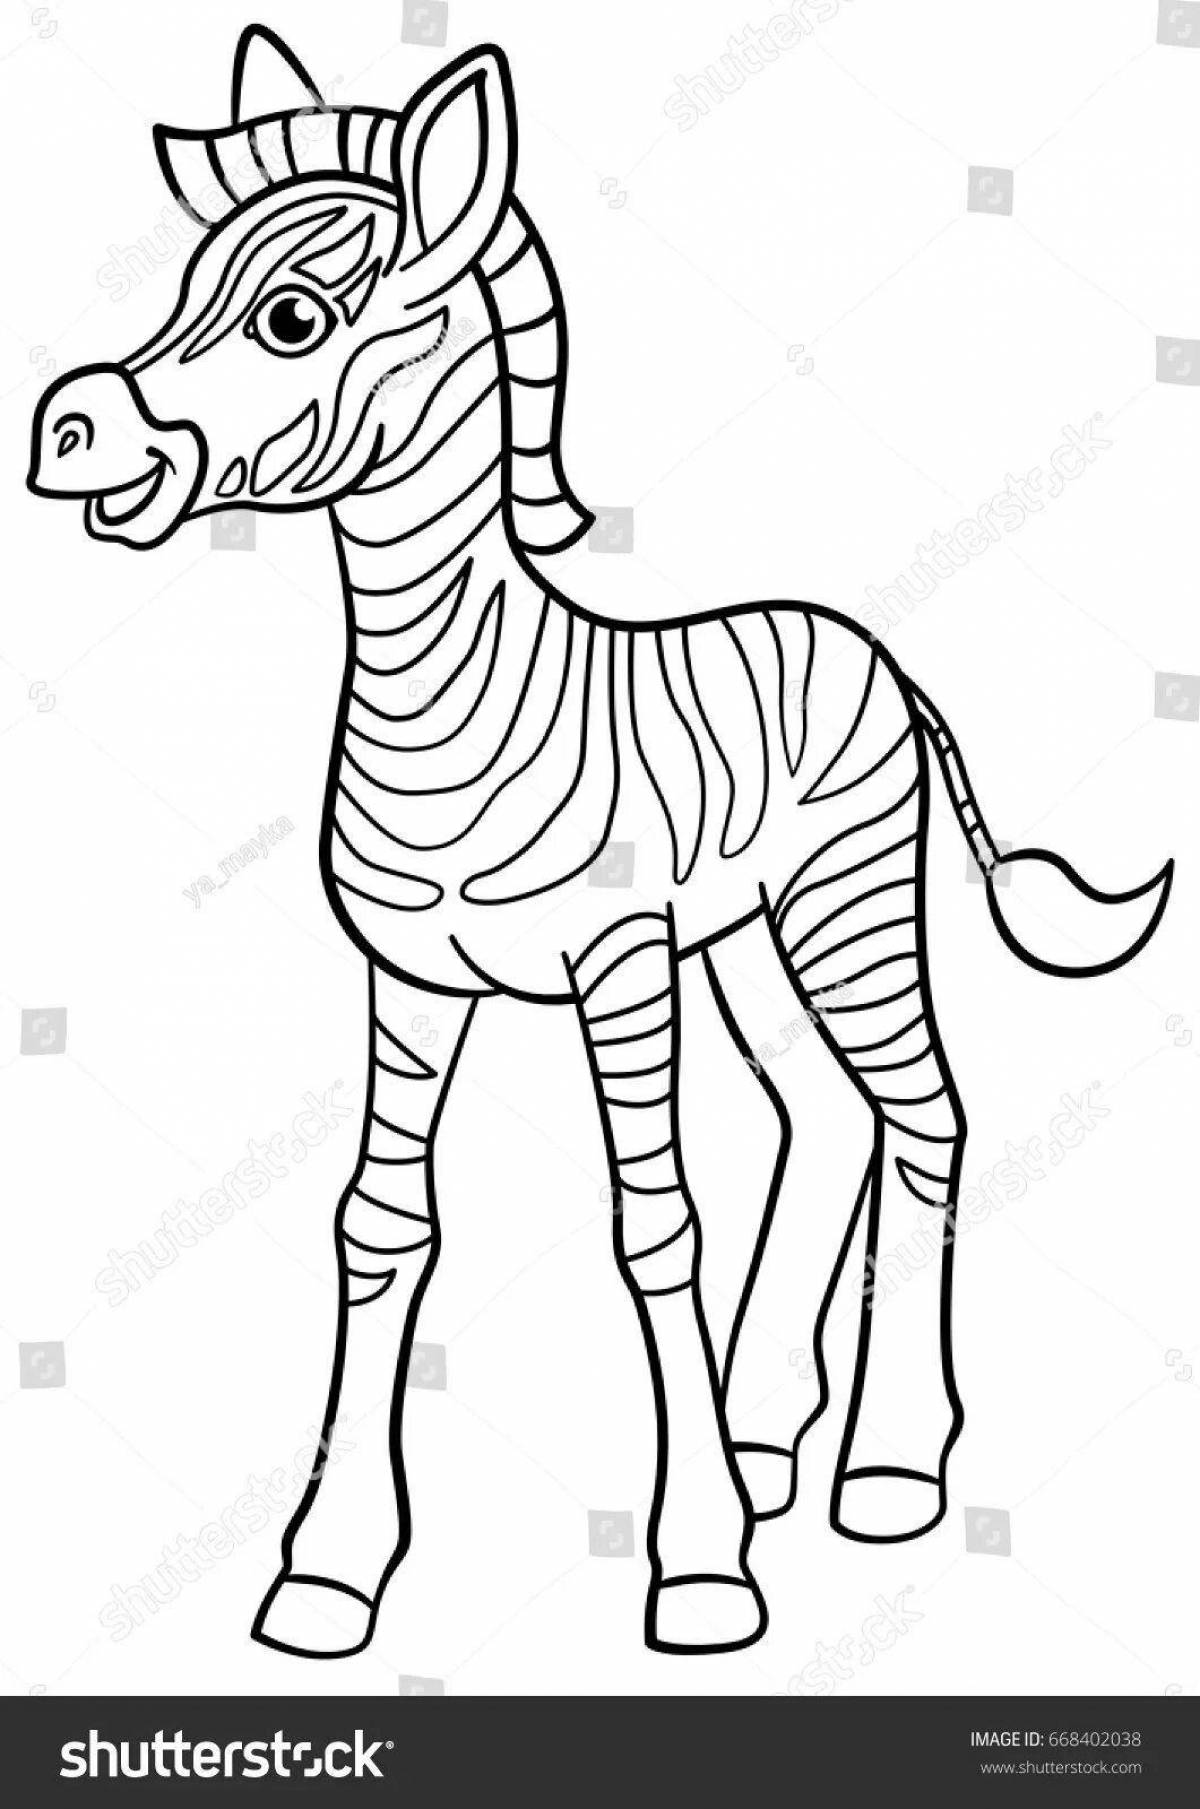 Great zebra coloring book for little ones